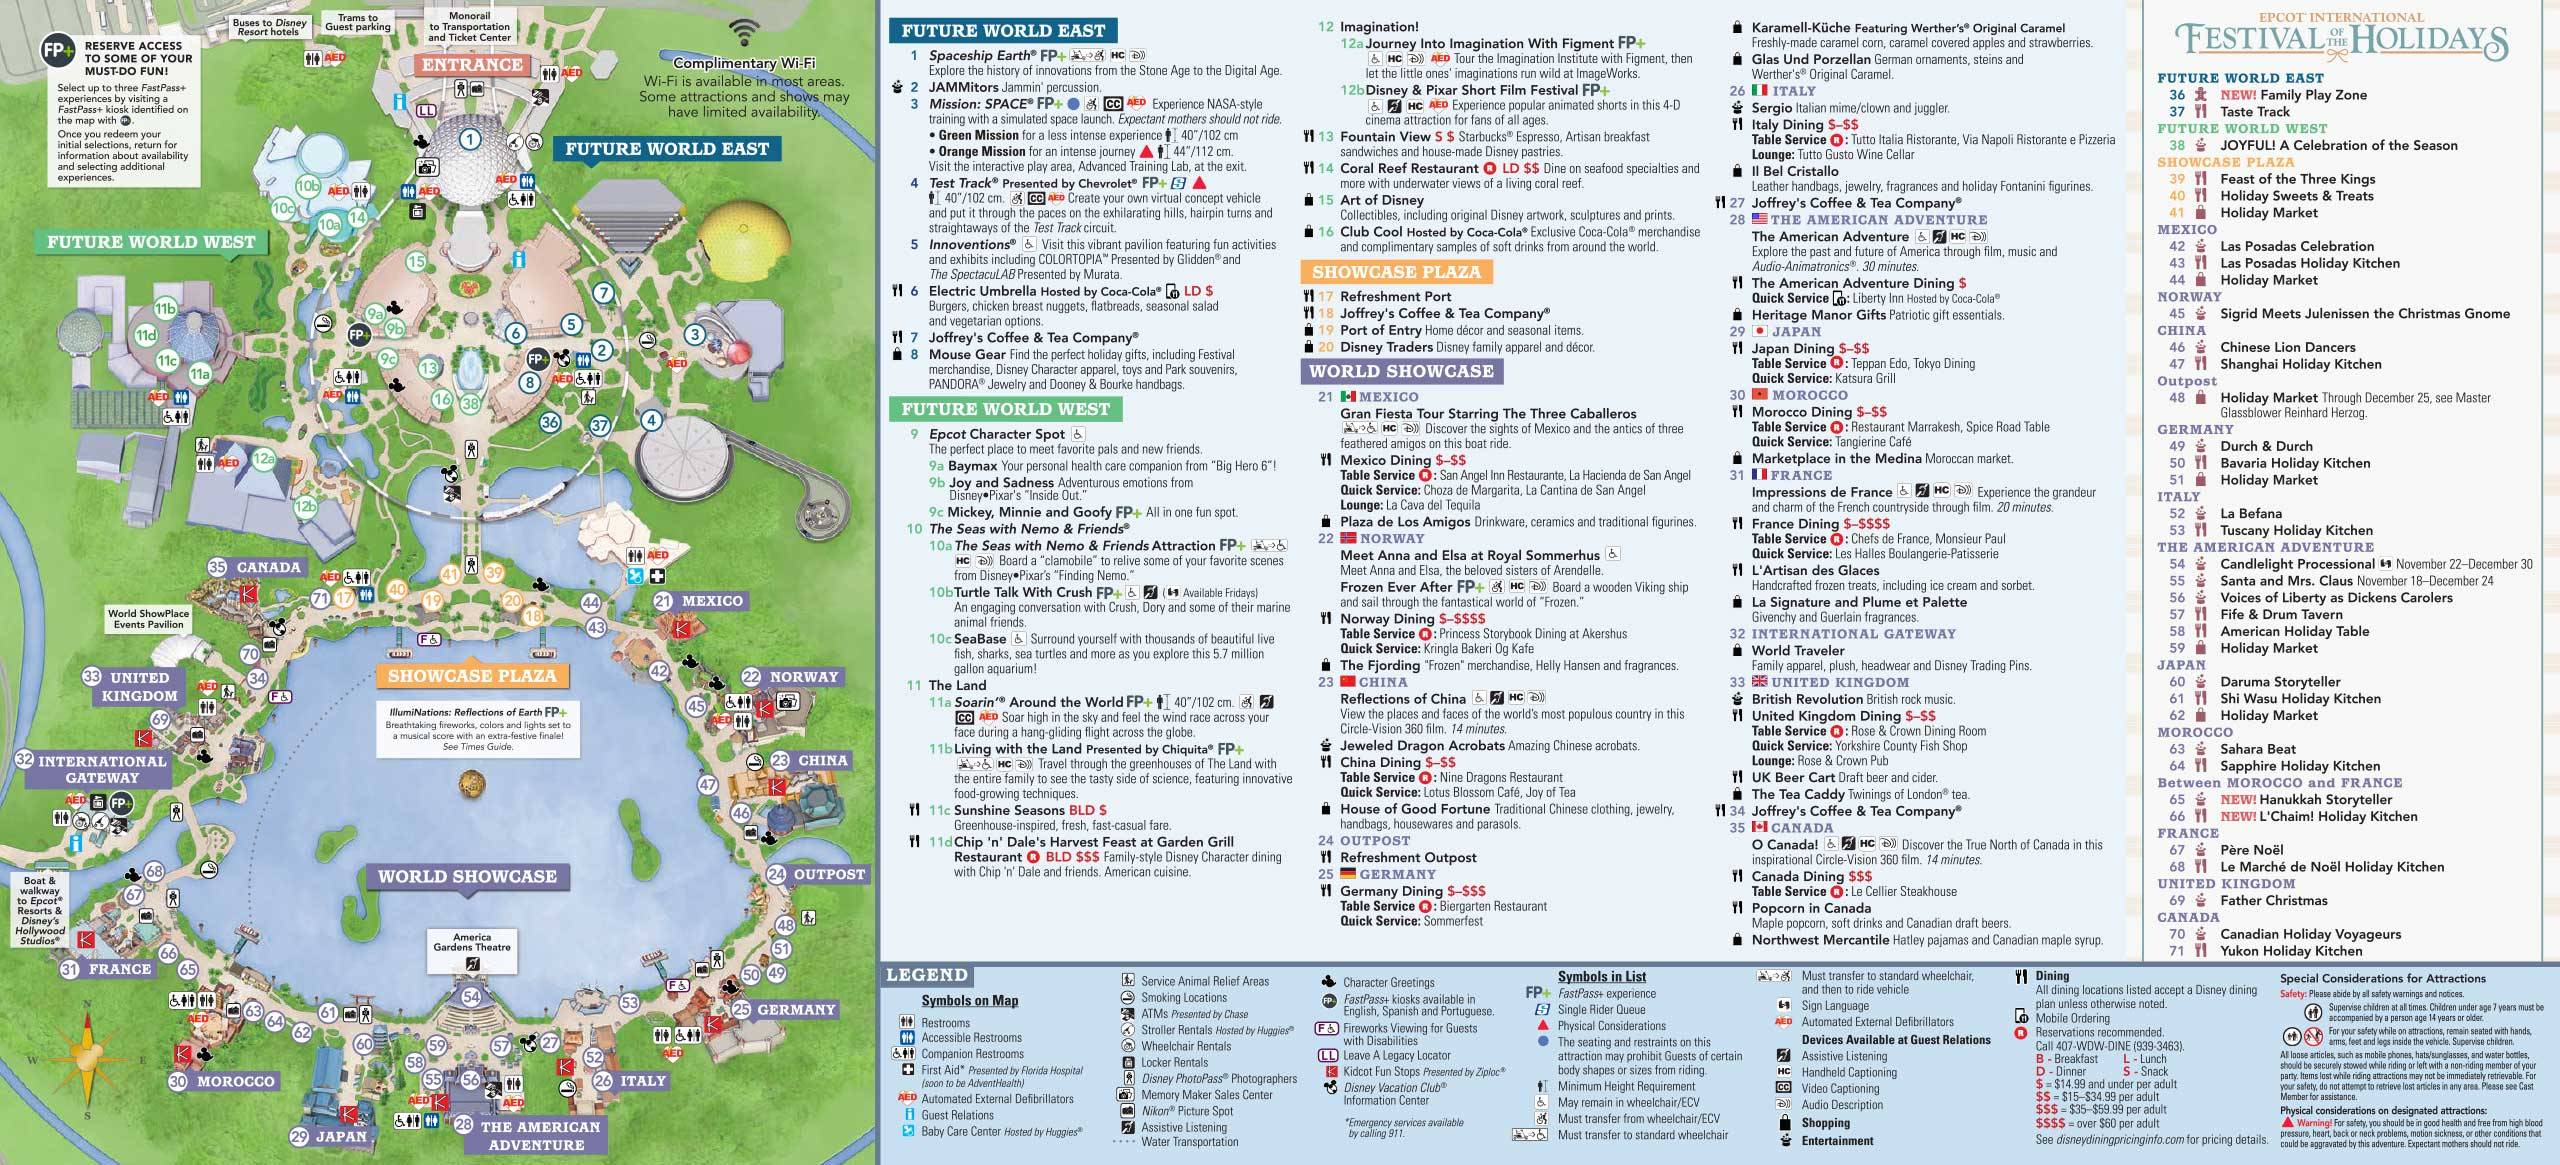 2018 Epcot Festival of the Holidays guide map - Back